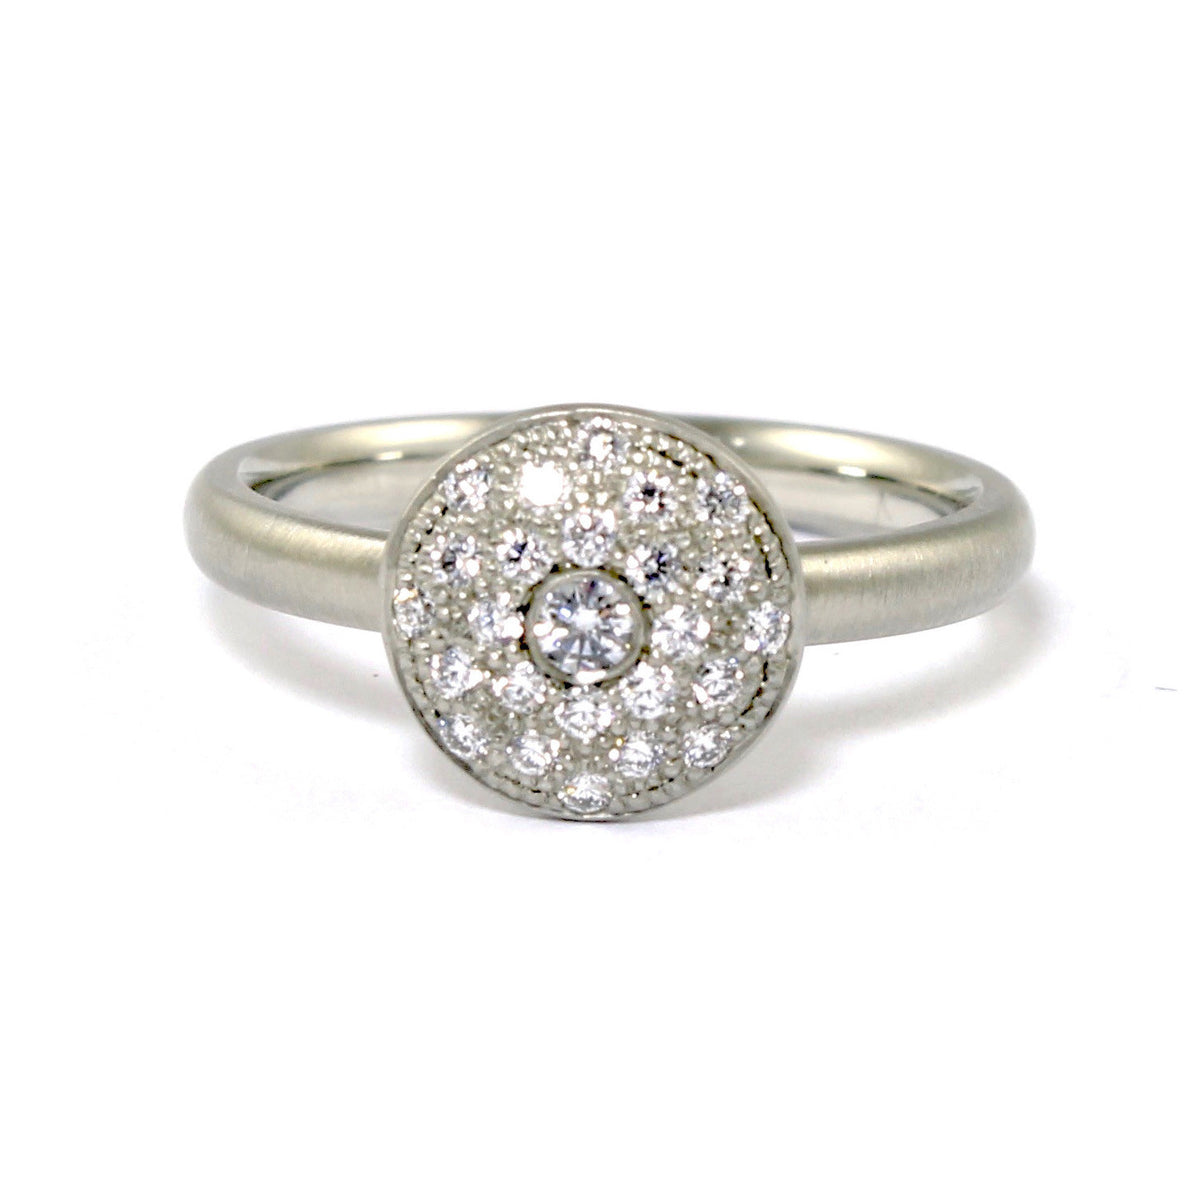 SALE! Diamond Encrusted and 14 KT White Gold Pave Disc Ring by Anne Sp ...